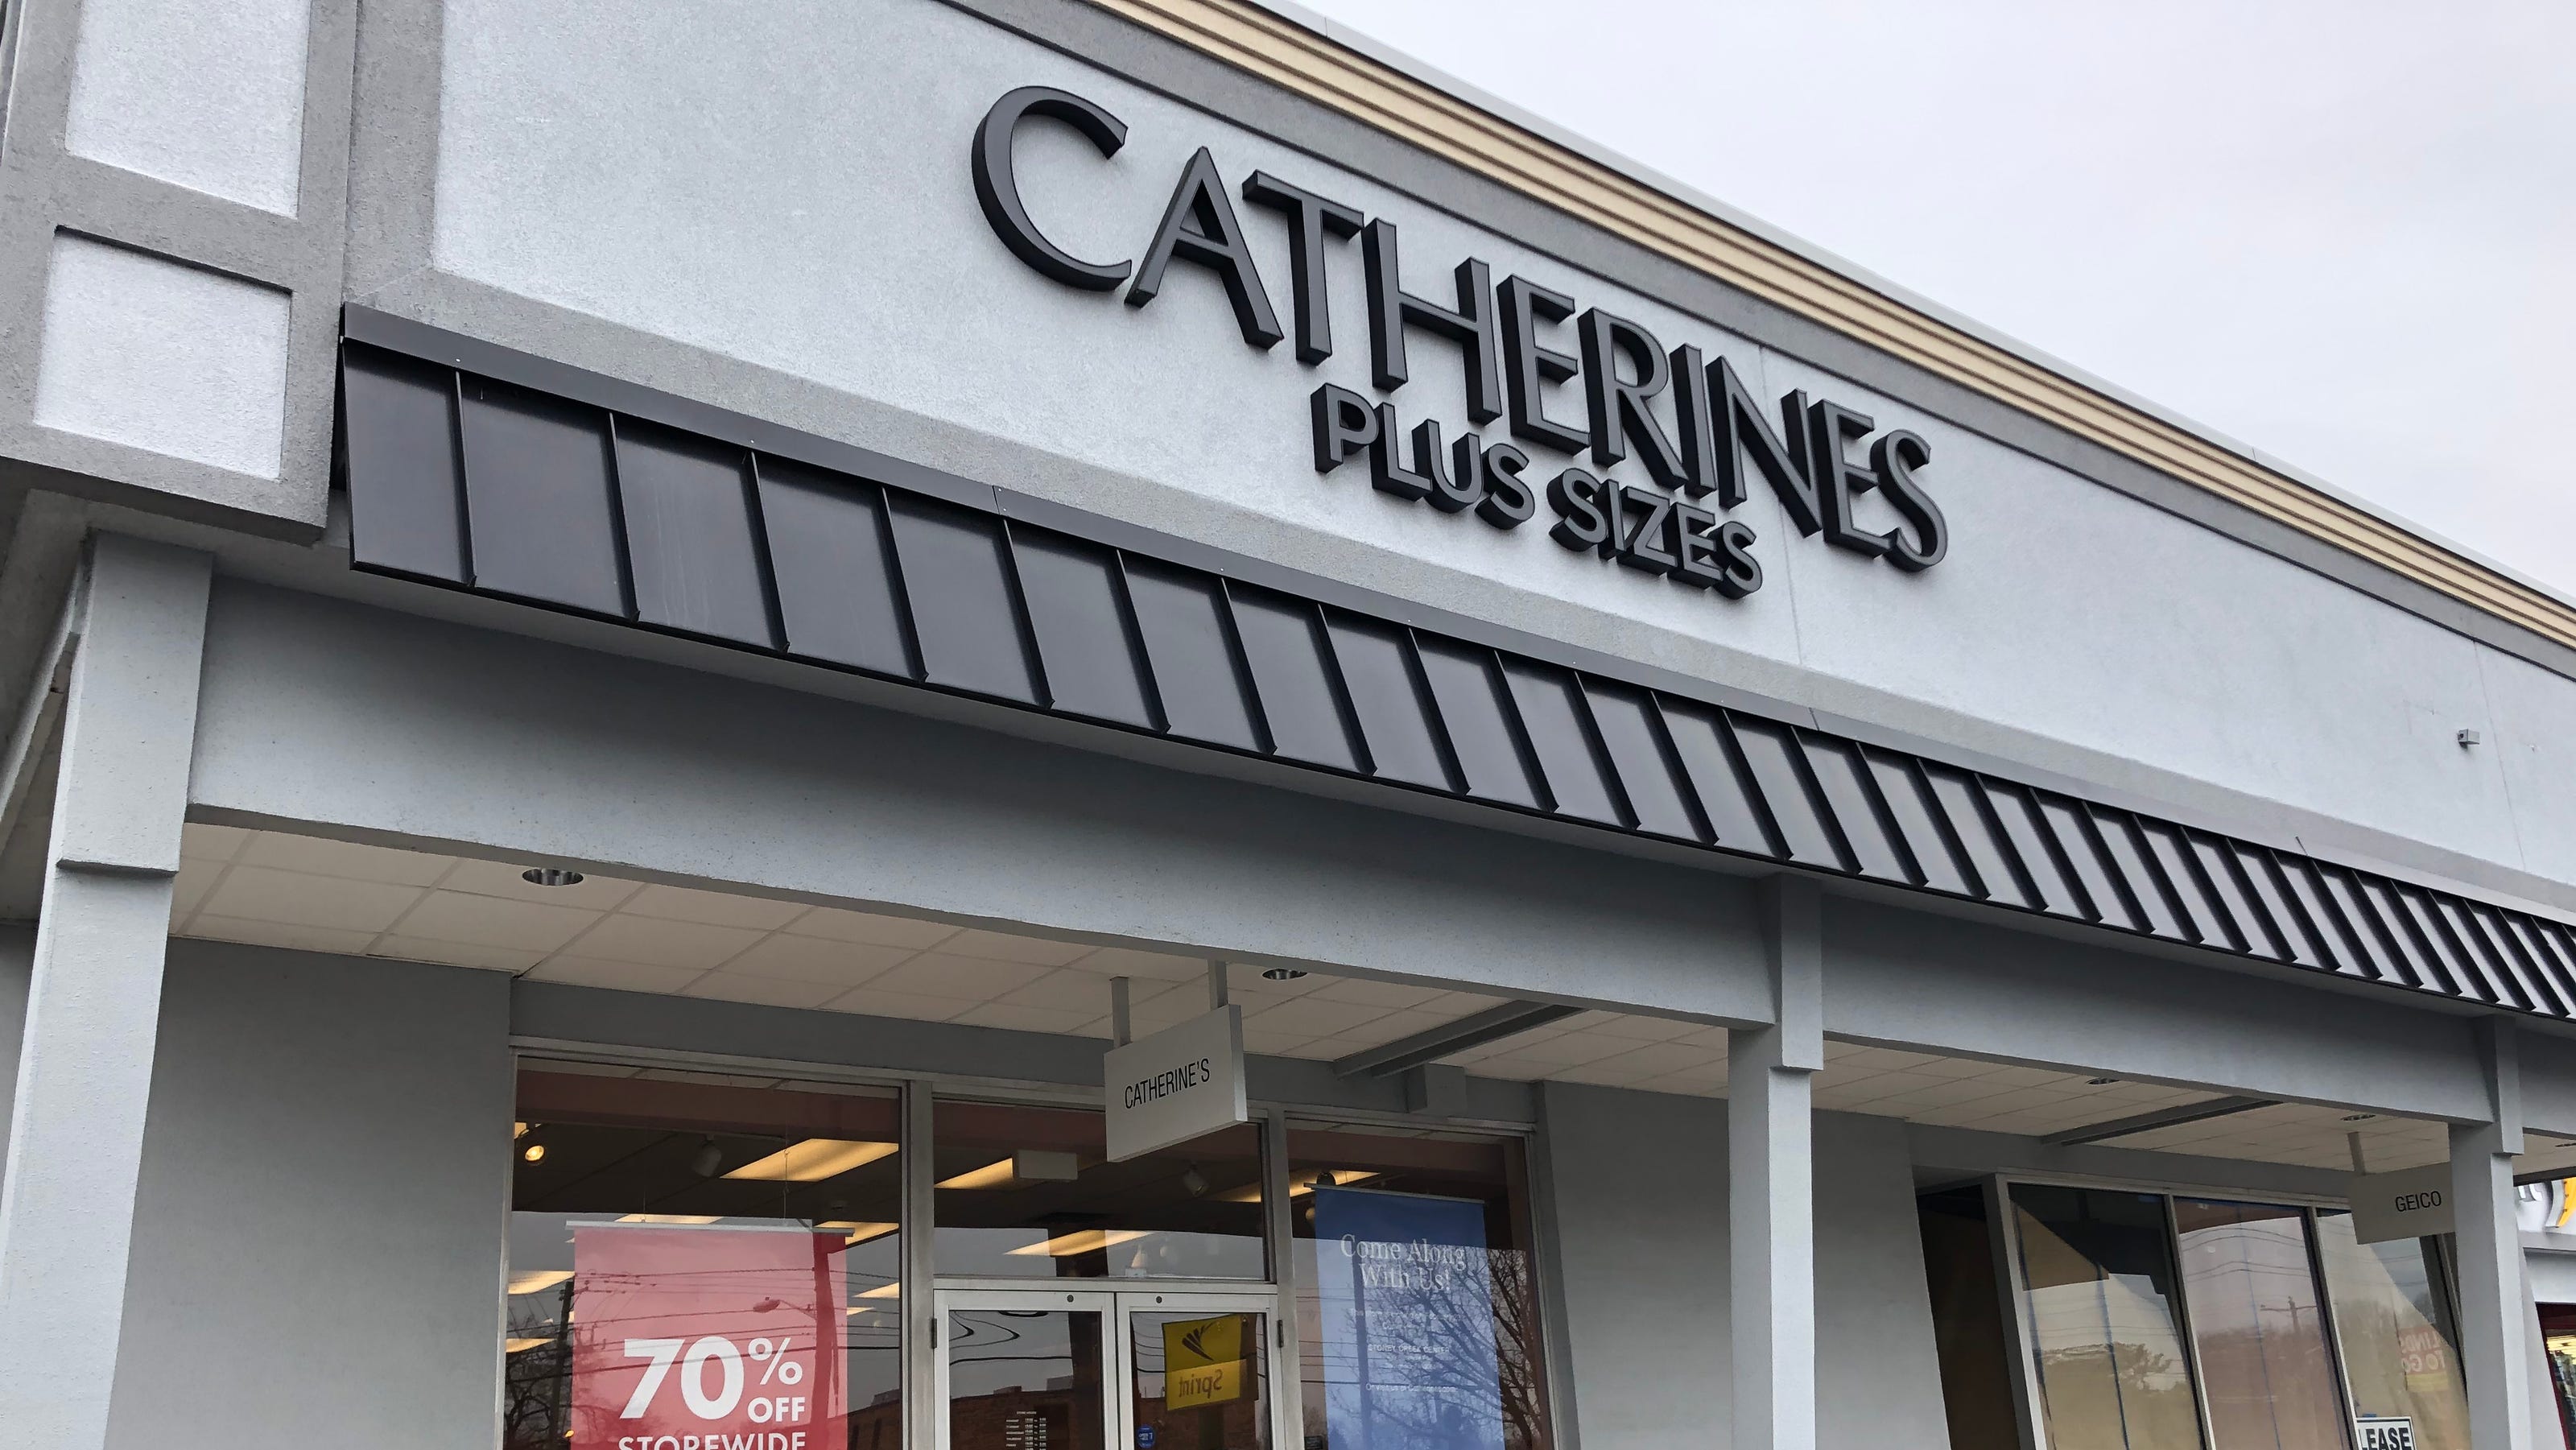 Catherines stores closings 2020 All stores to close in bankruptcy